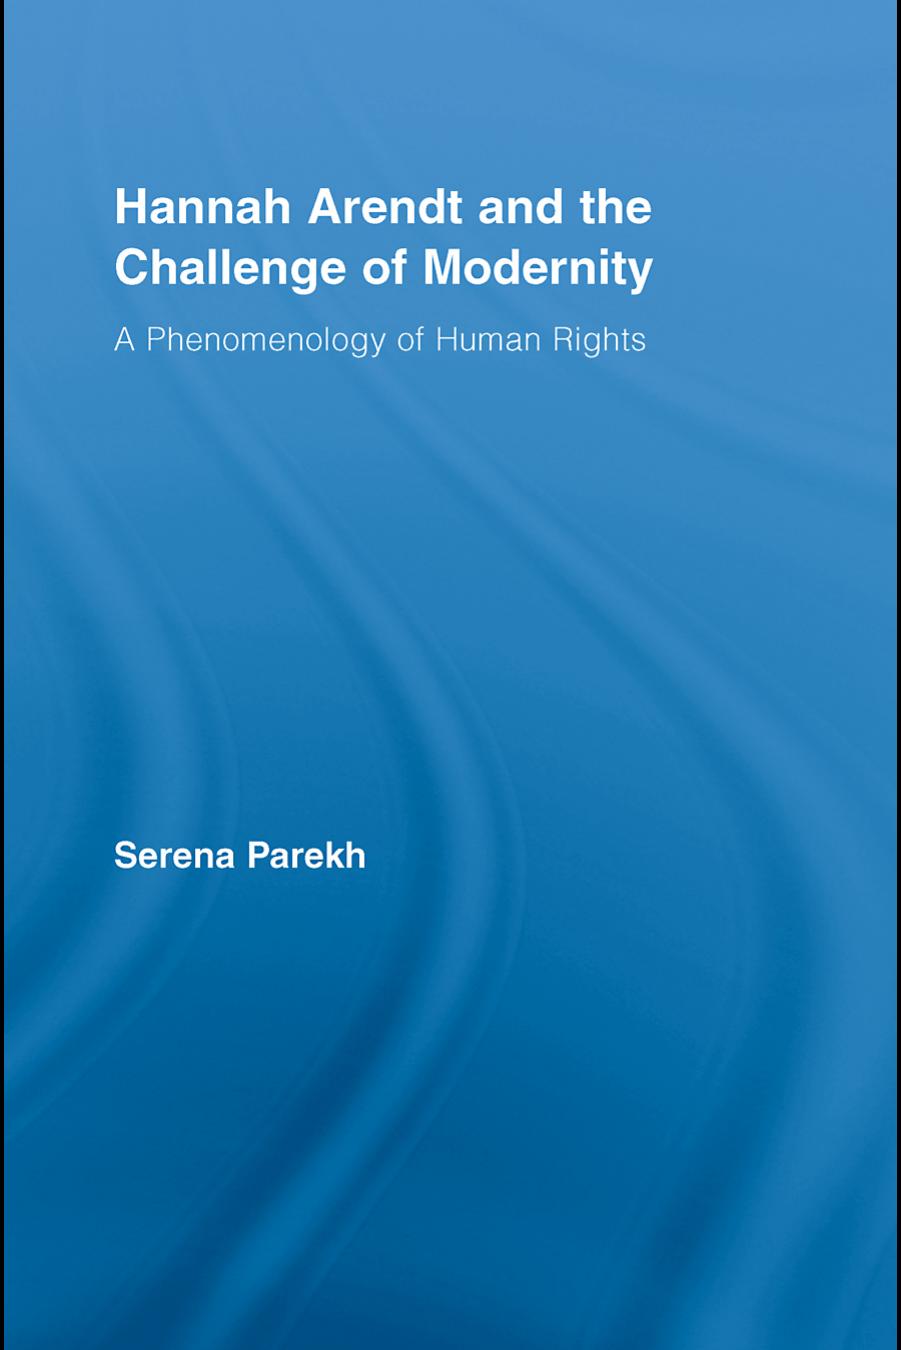 Hannah Arendt and the Challenge of Modernity: A Phenomenology of Human Rights